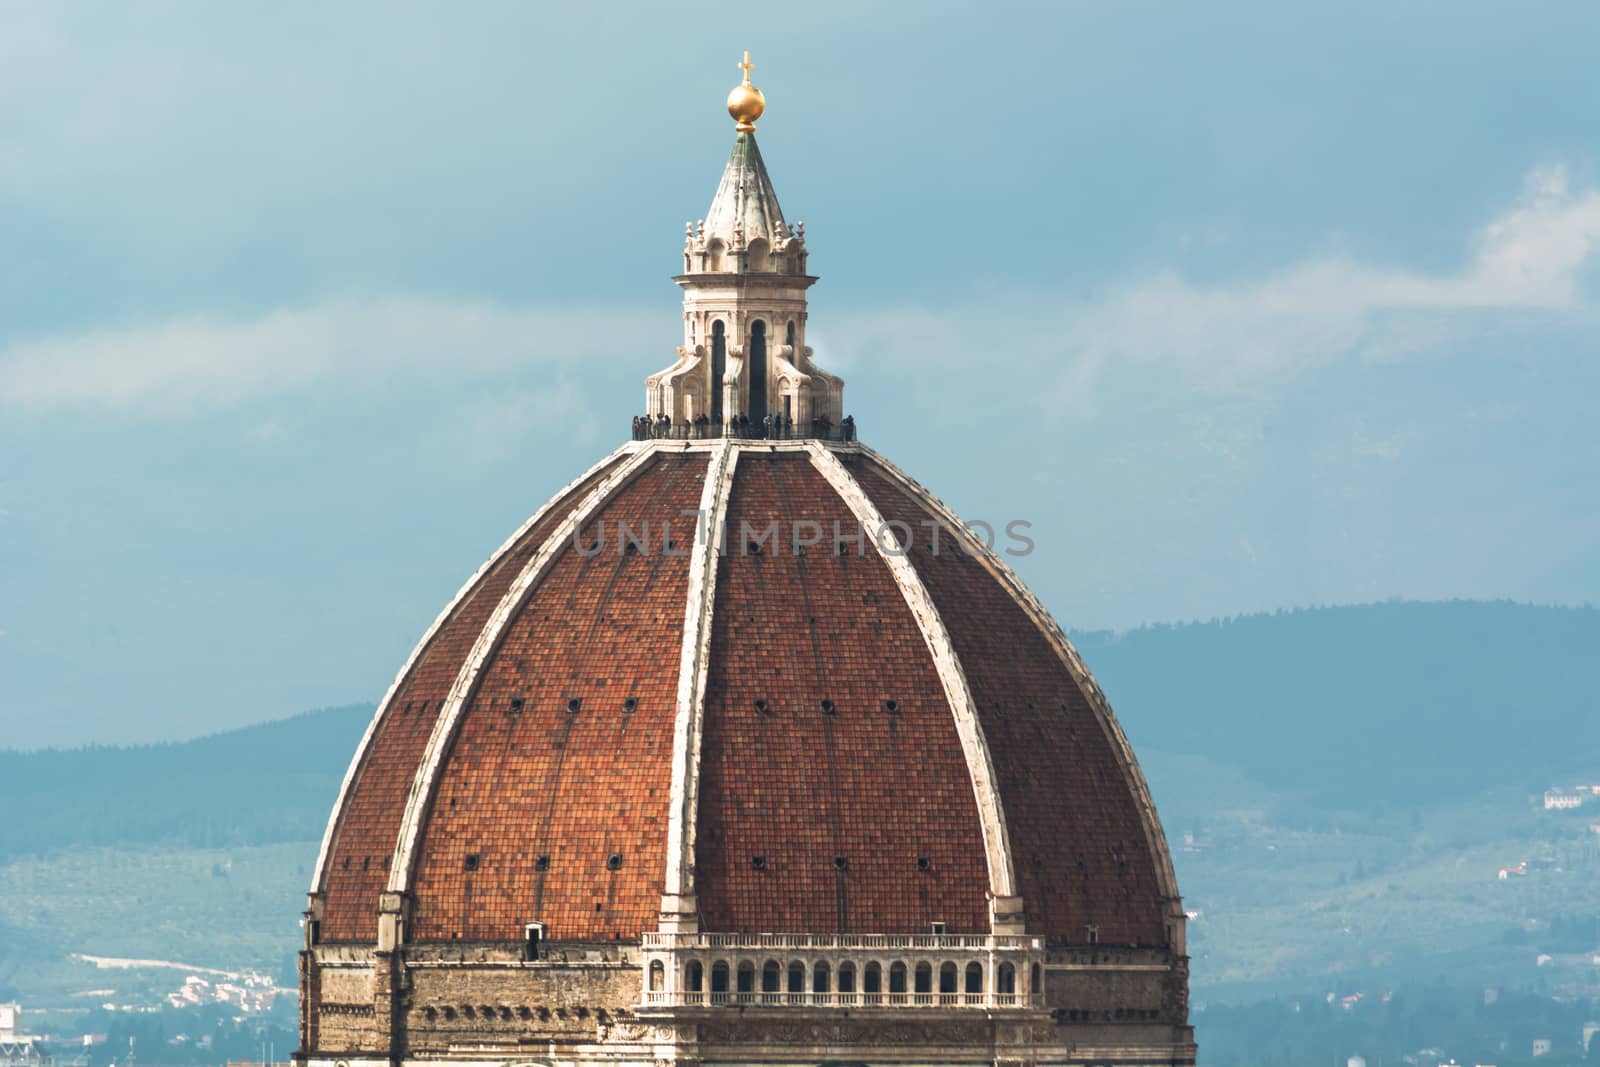 the famous dome of the Santa Maria in Fiore church designed by Brunelleschi